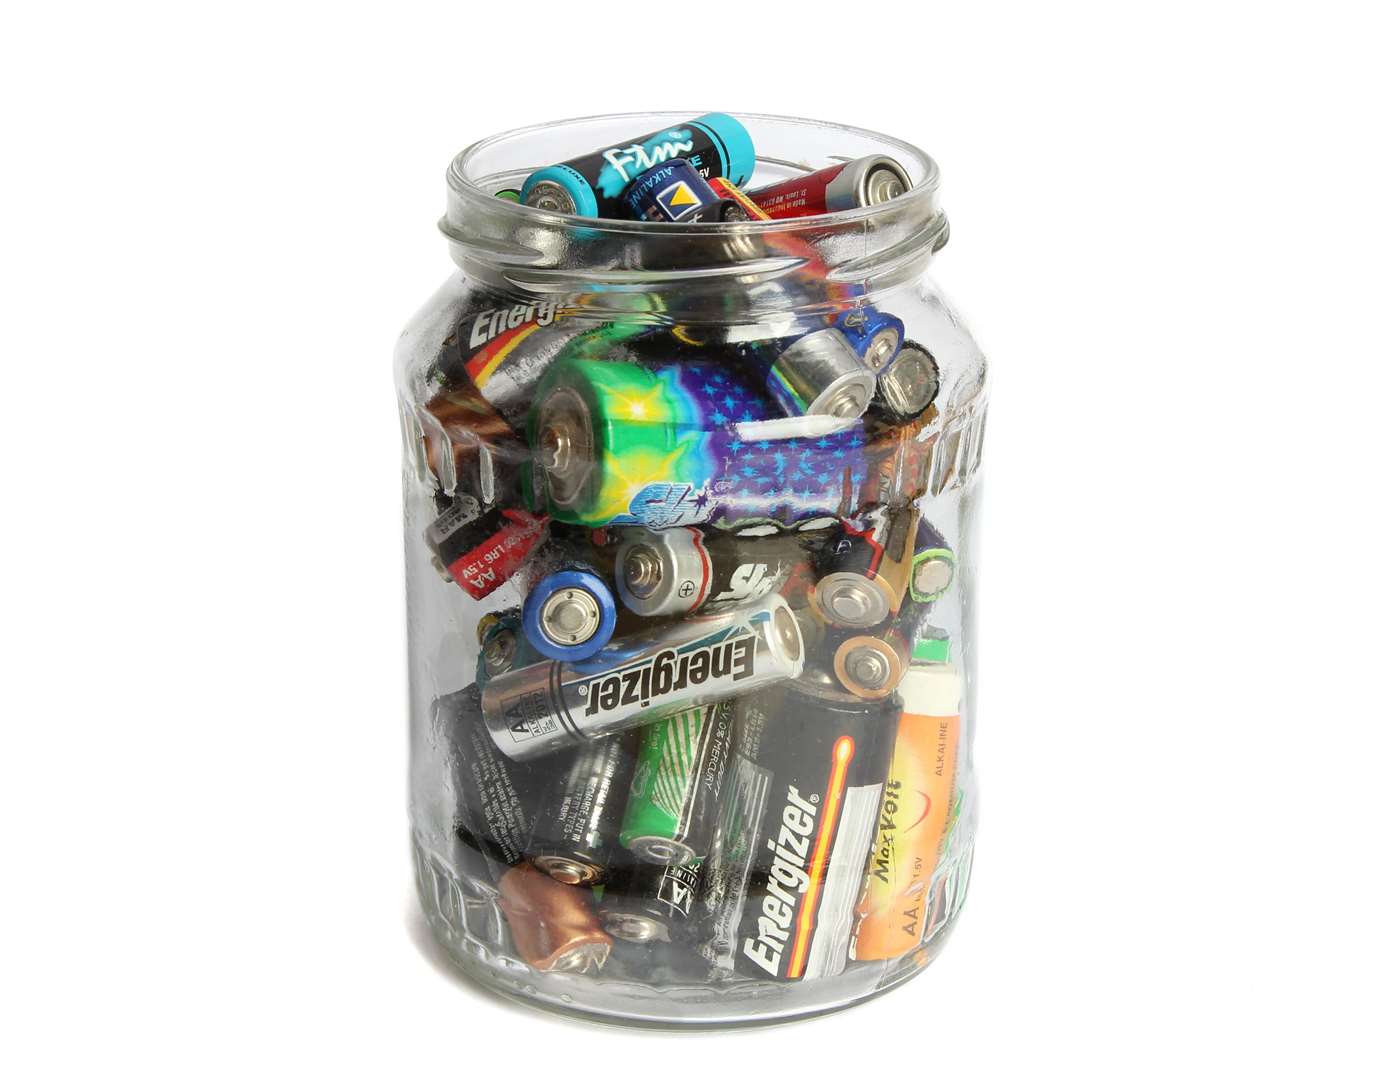 Store used batteries separately for recycling.